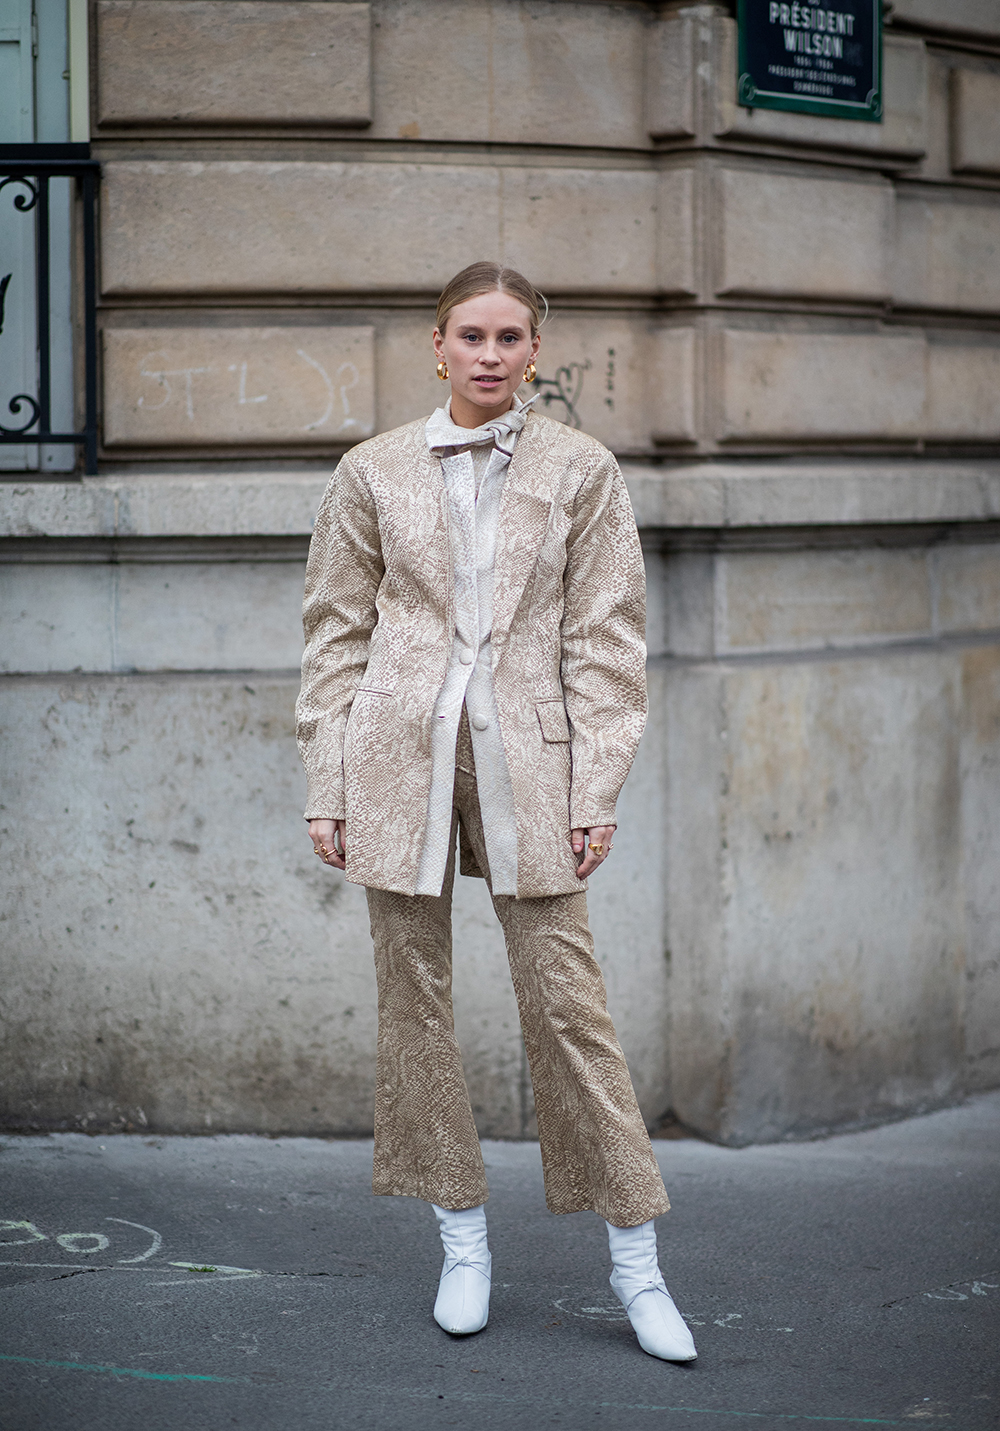 PARIS, FRANCE - MARCH 01: Tine Andrea is seen wearing jacket and flared pants during Paris Fashion Week Womenswear Fall/Winter 2019/2020 on March 01, 2019 in Paris, France. (Photo by Christian Vierig/Getty Images)